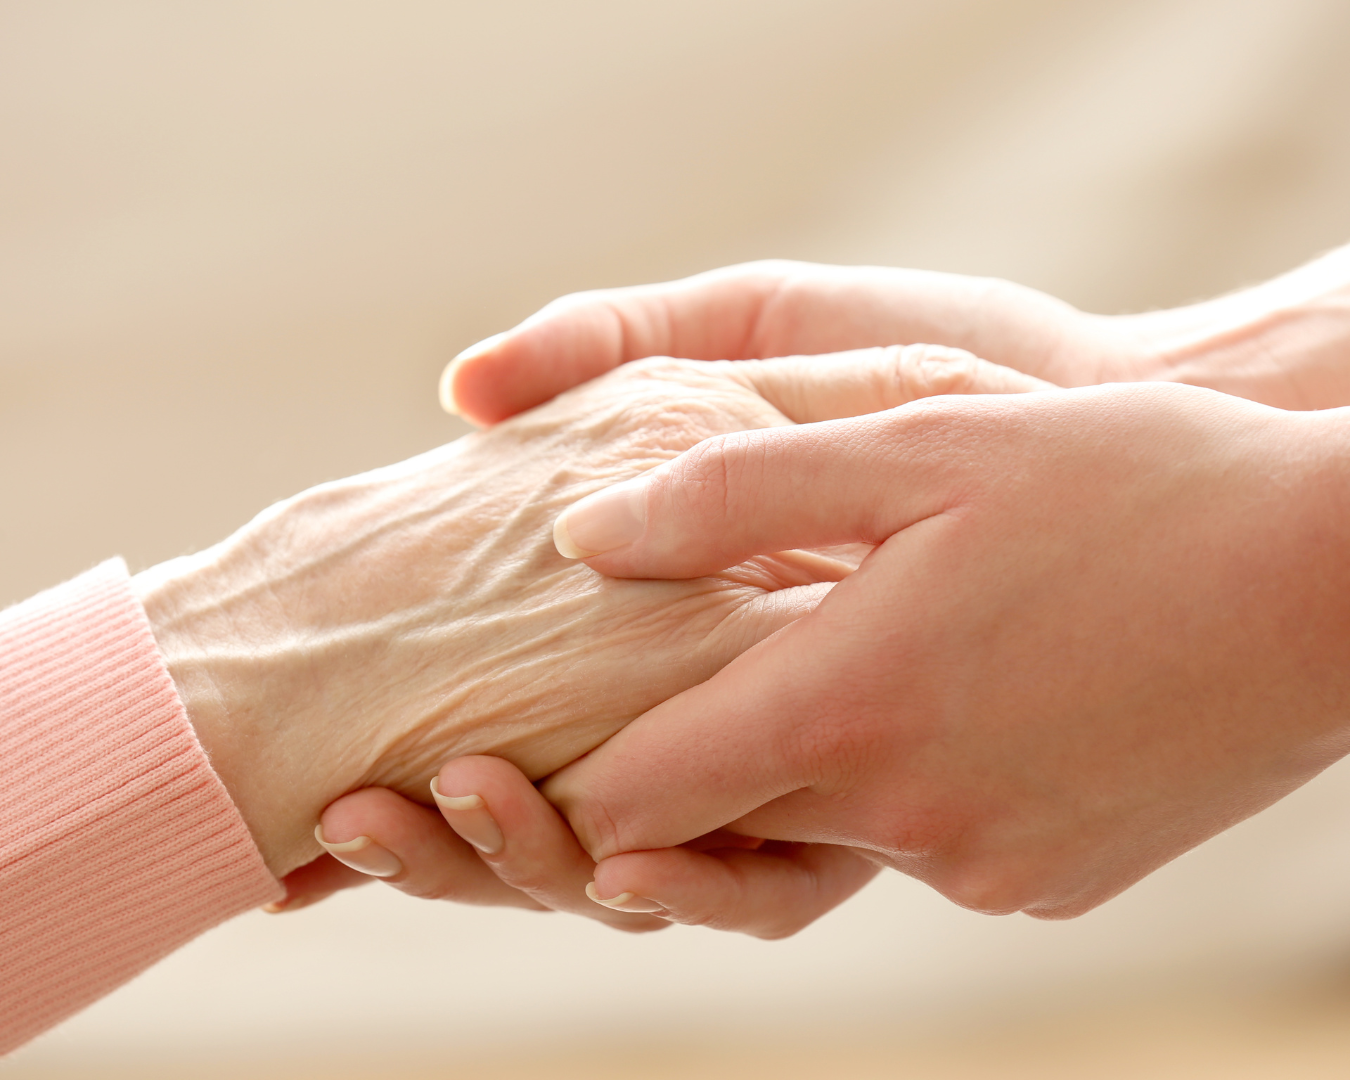 How to Support A Loved One Recently Diagnosed with Parkinsons Disease